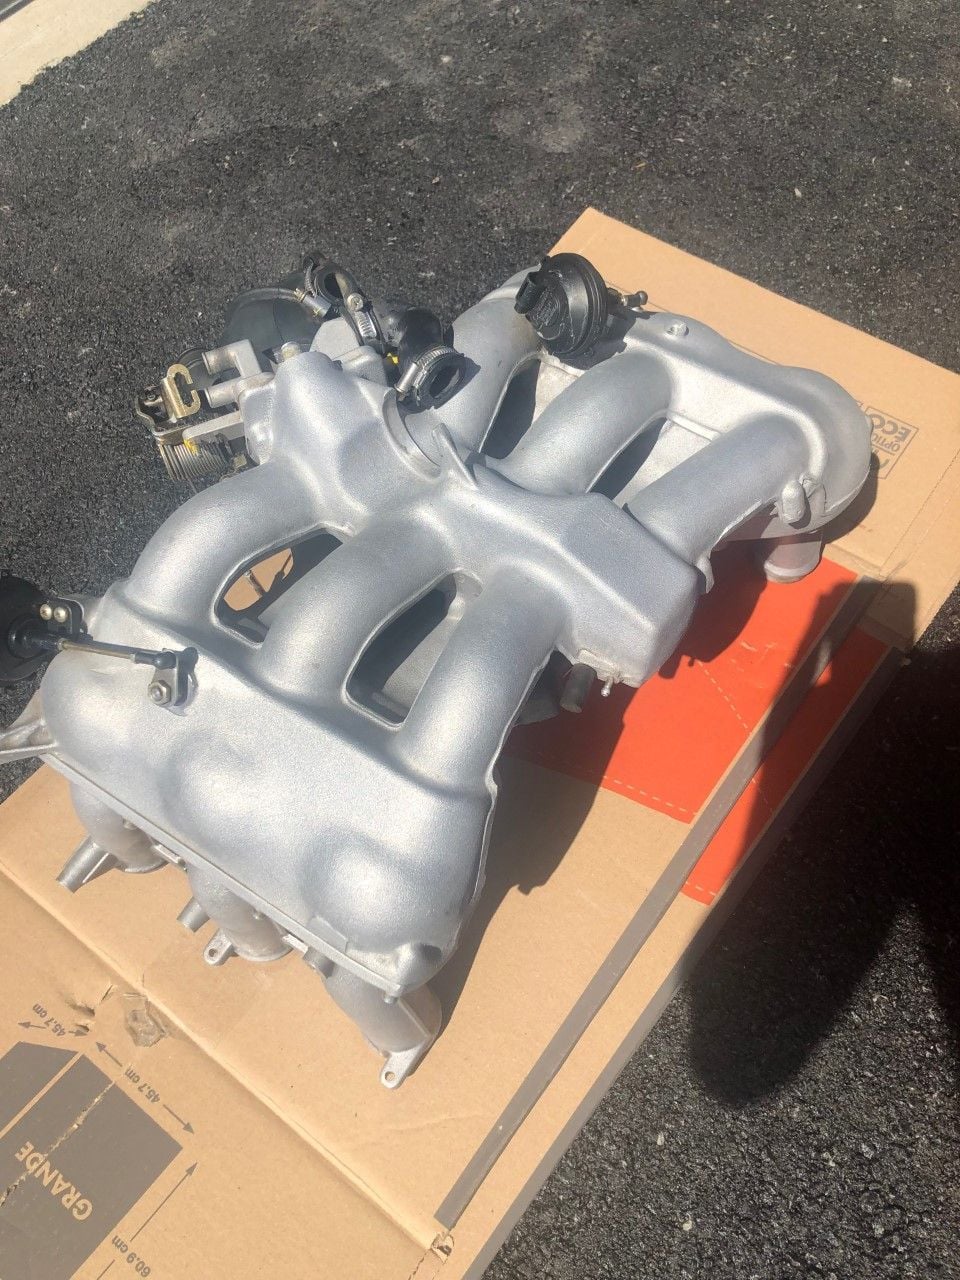 Engine - Intake/Fuel - Porsche 993 Varioram intake only - Used - Champlain, NY 12919, United States